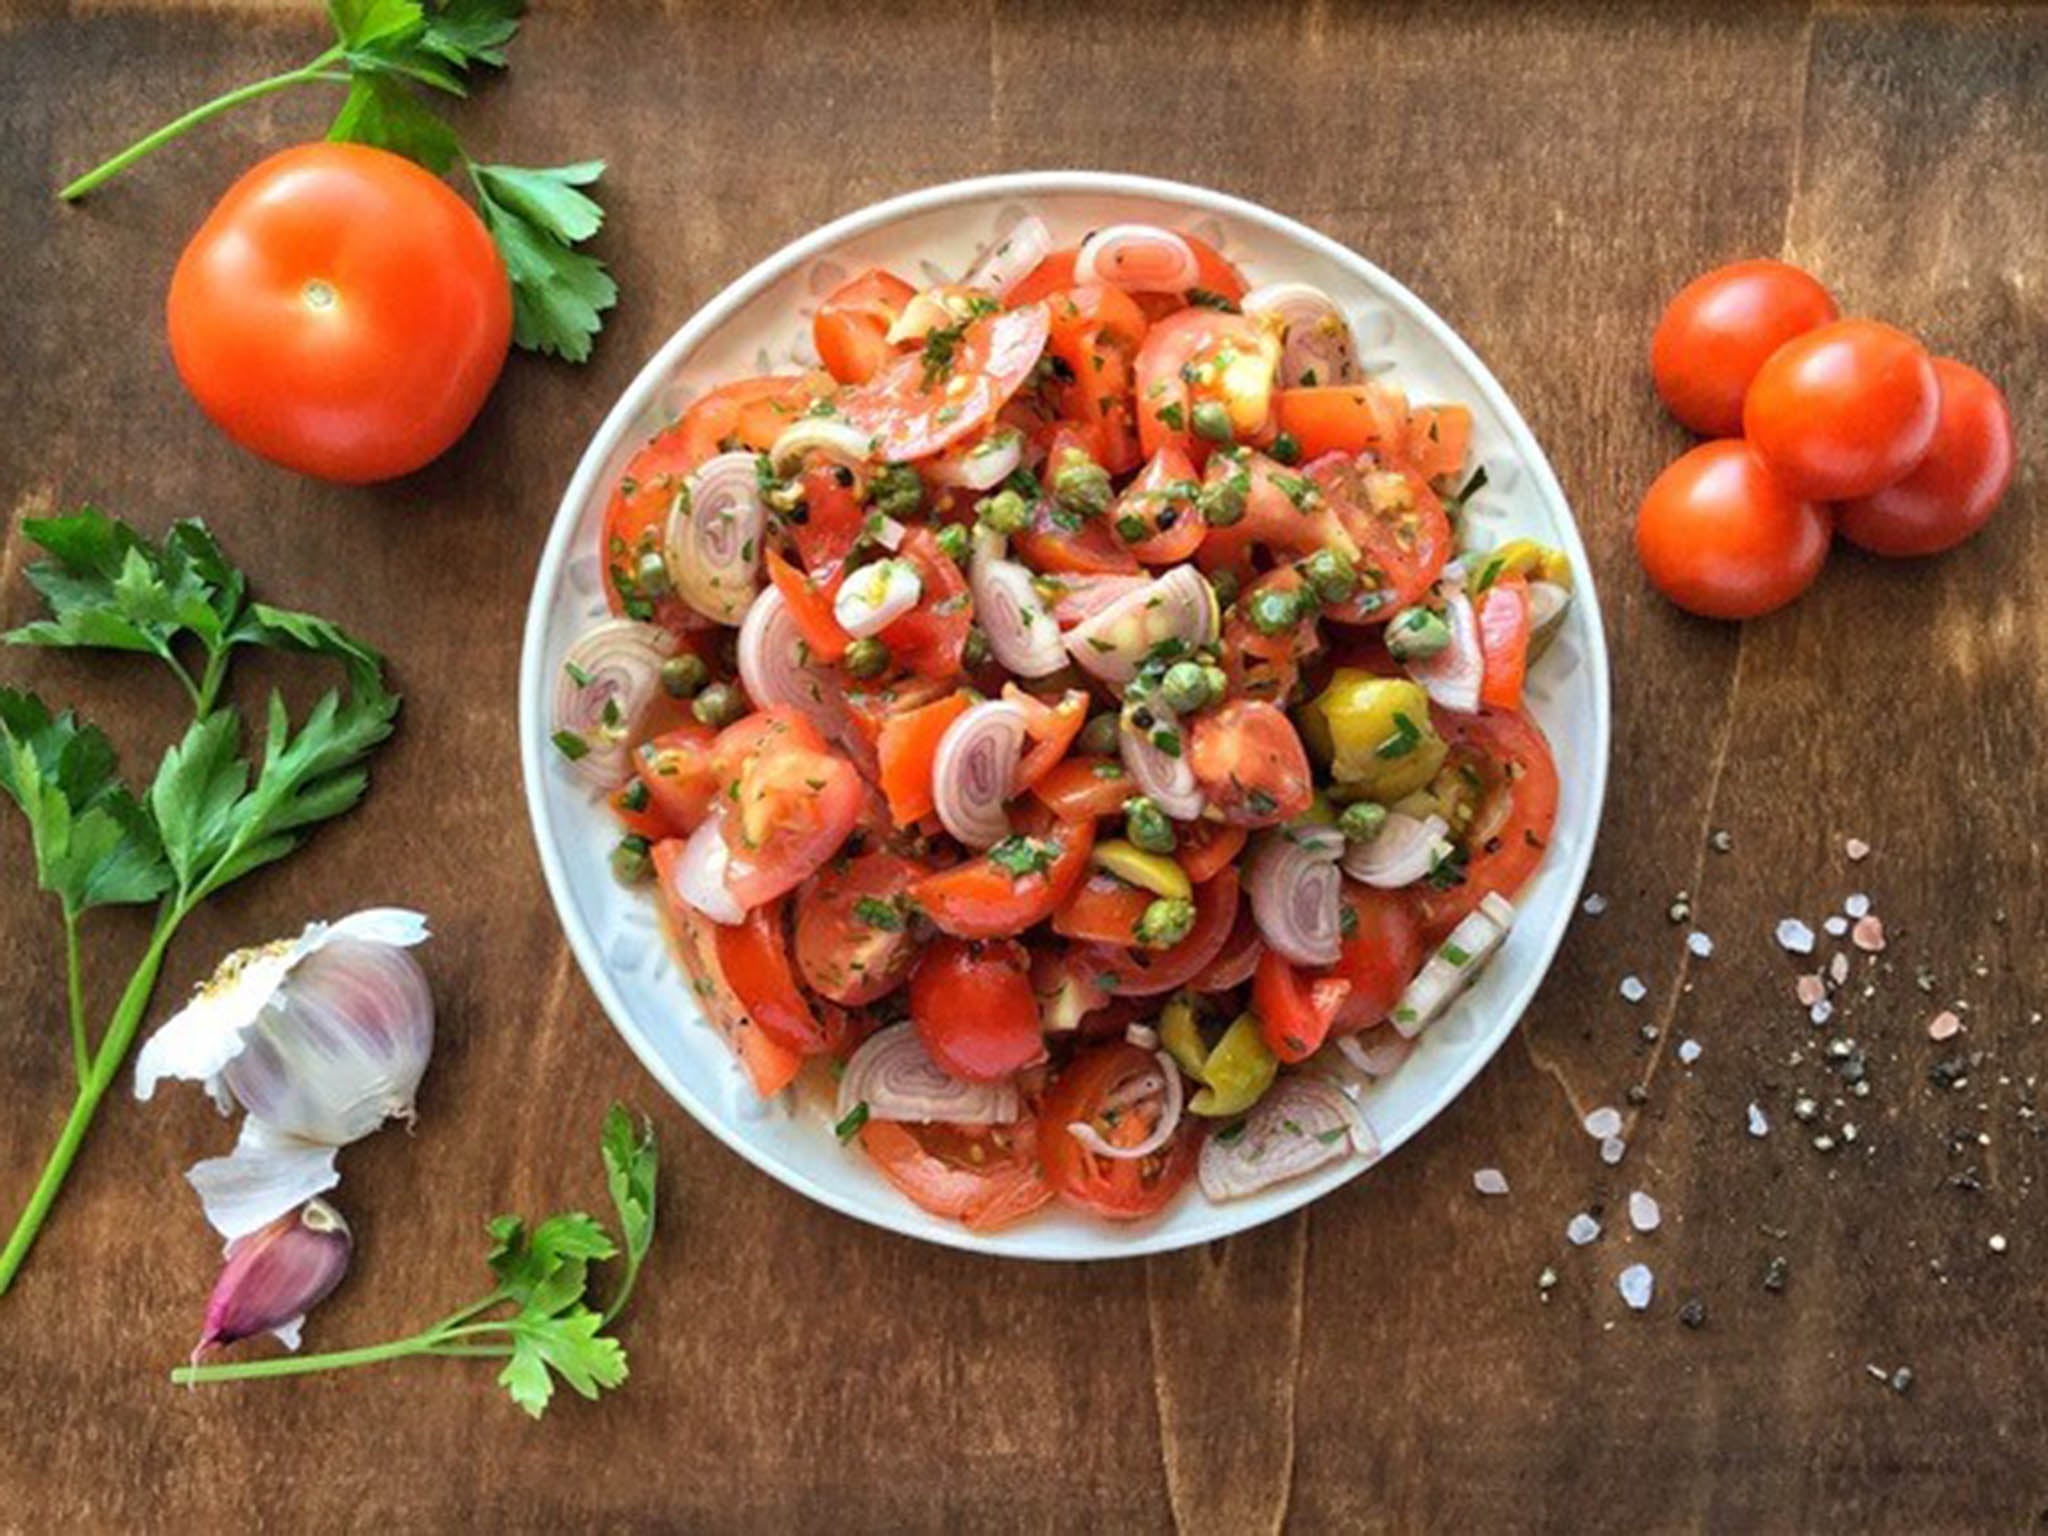 How to make tomato, caper and olive salad | The Independent | The ...